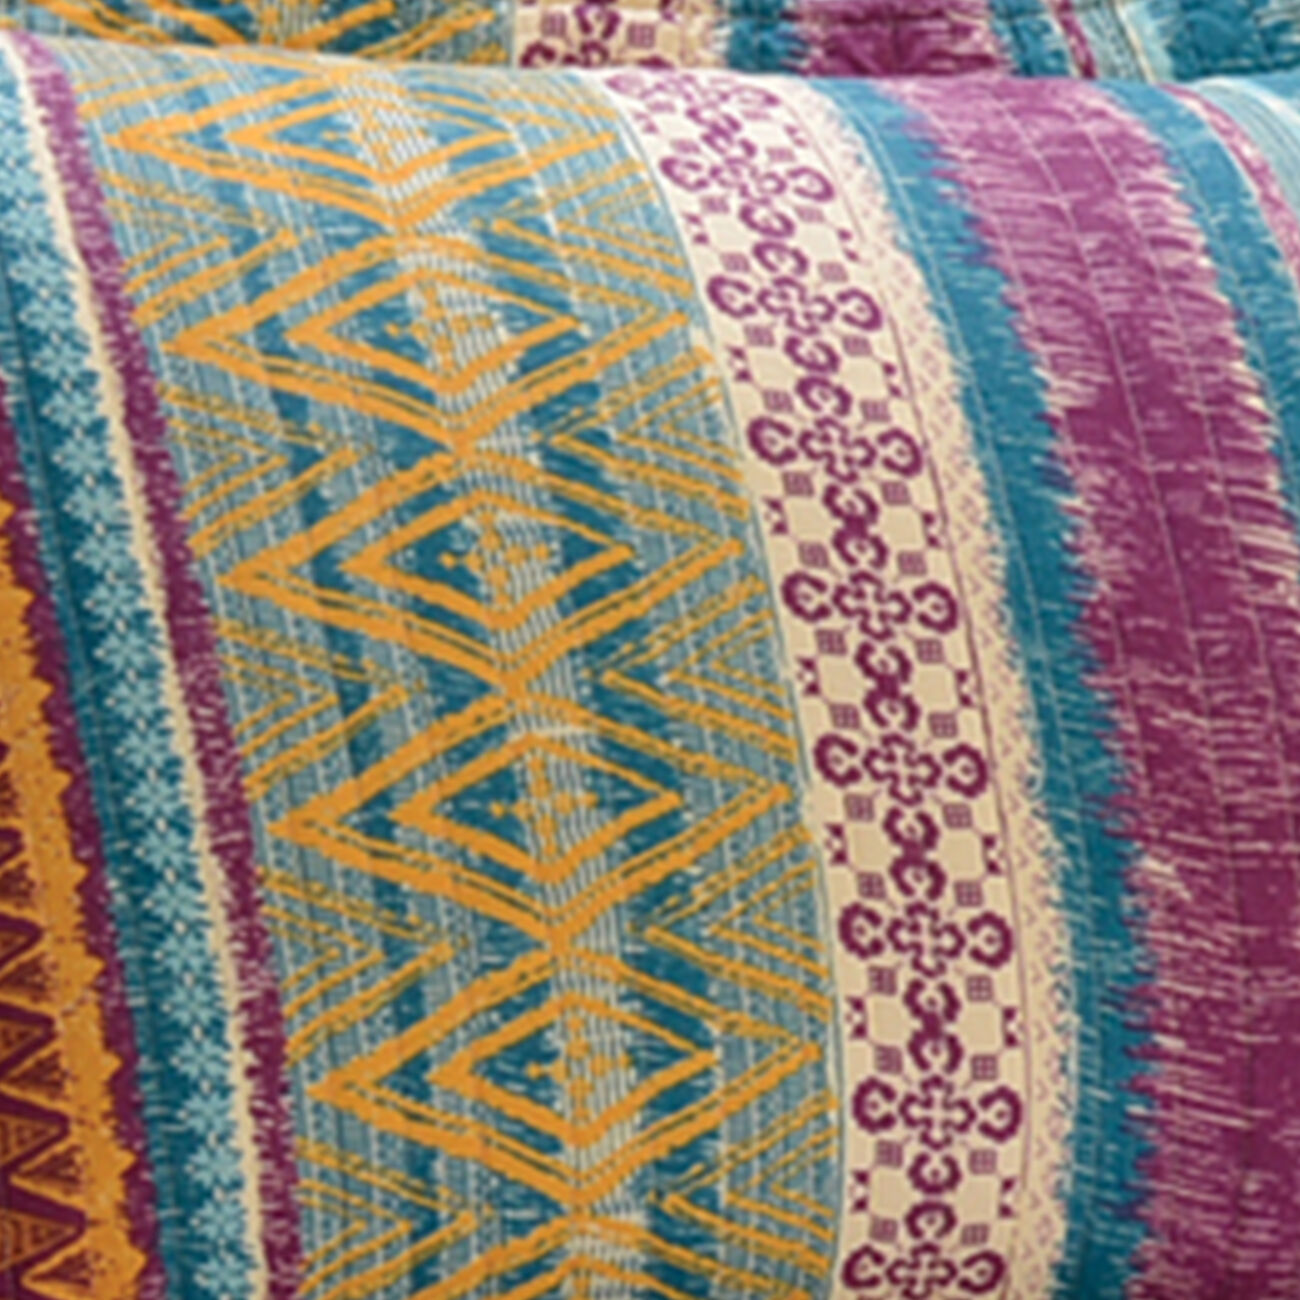 26 x 20 Cotton Filled Standard Sham with Tribal Motif Print, Multicolor